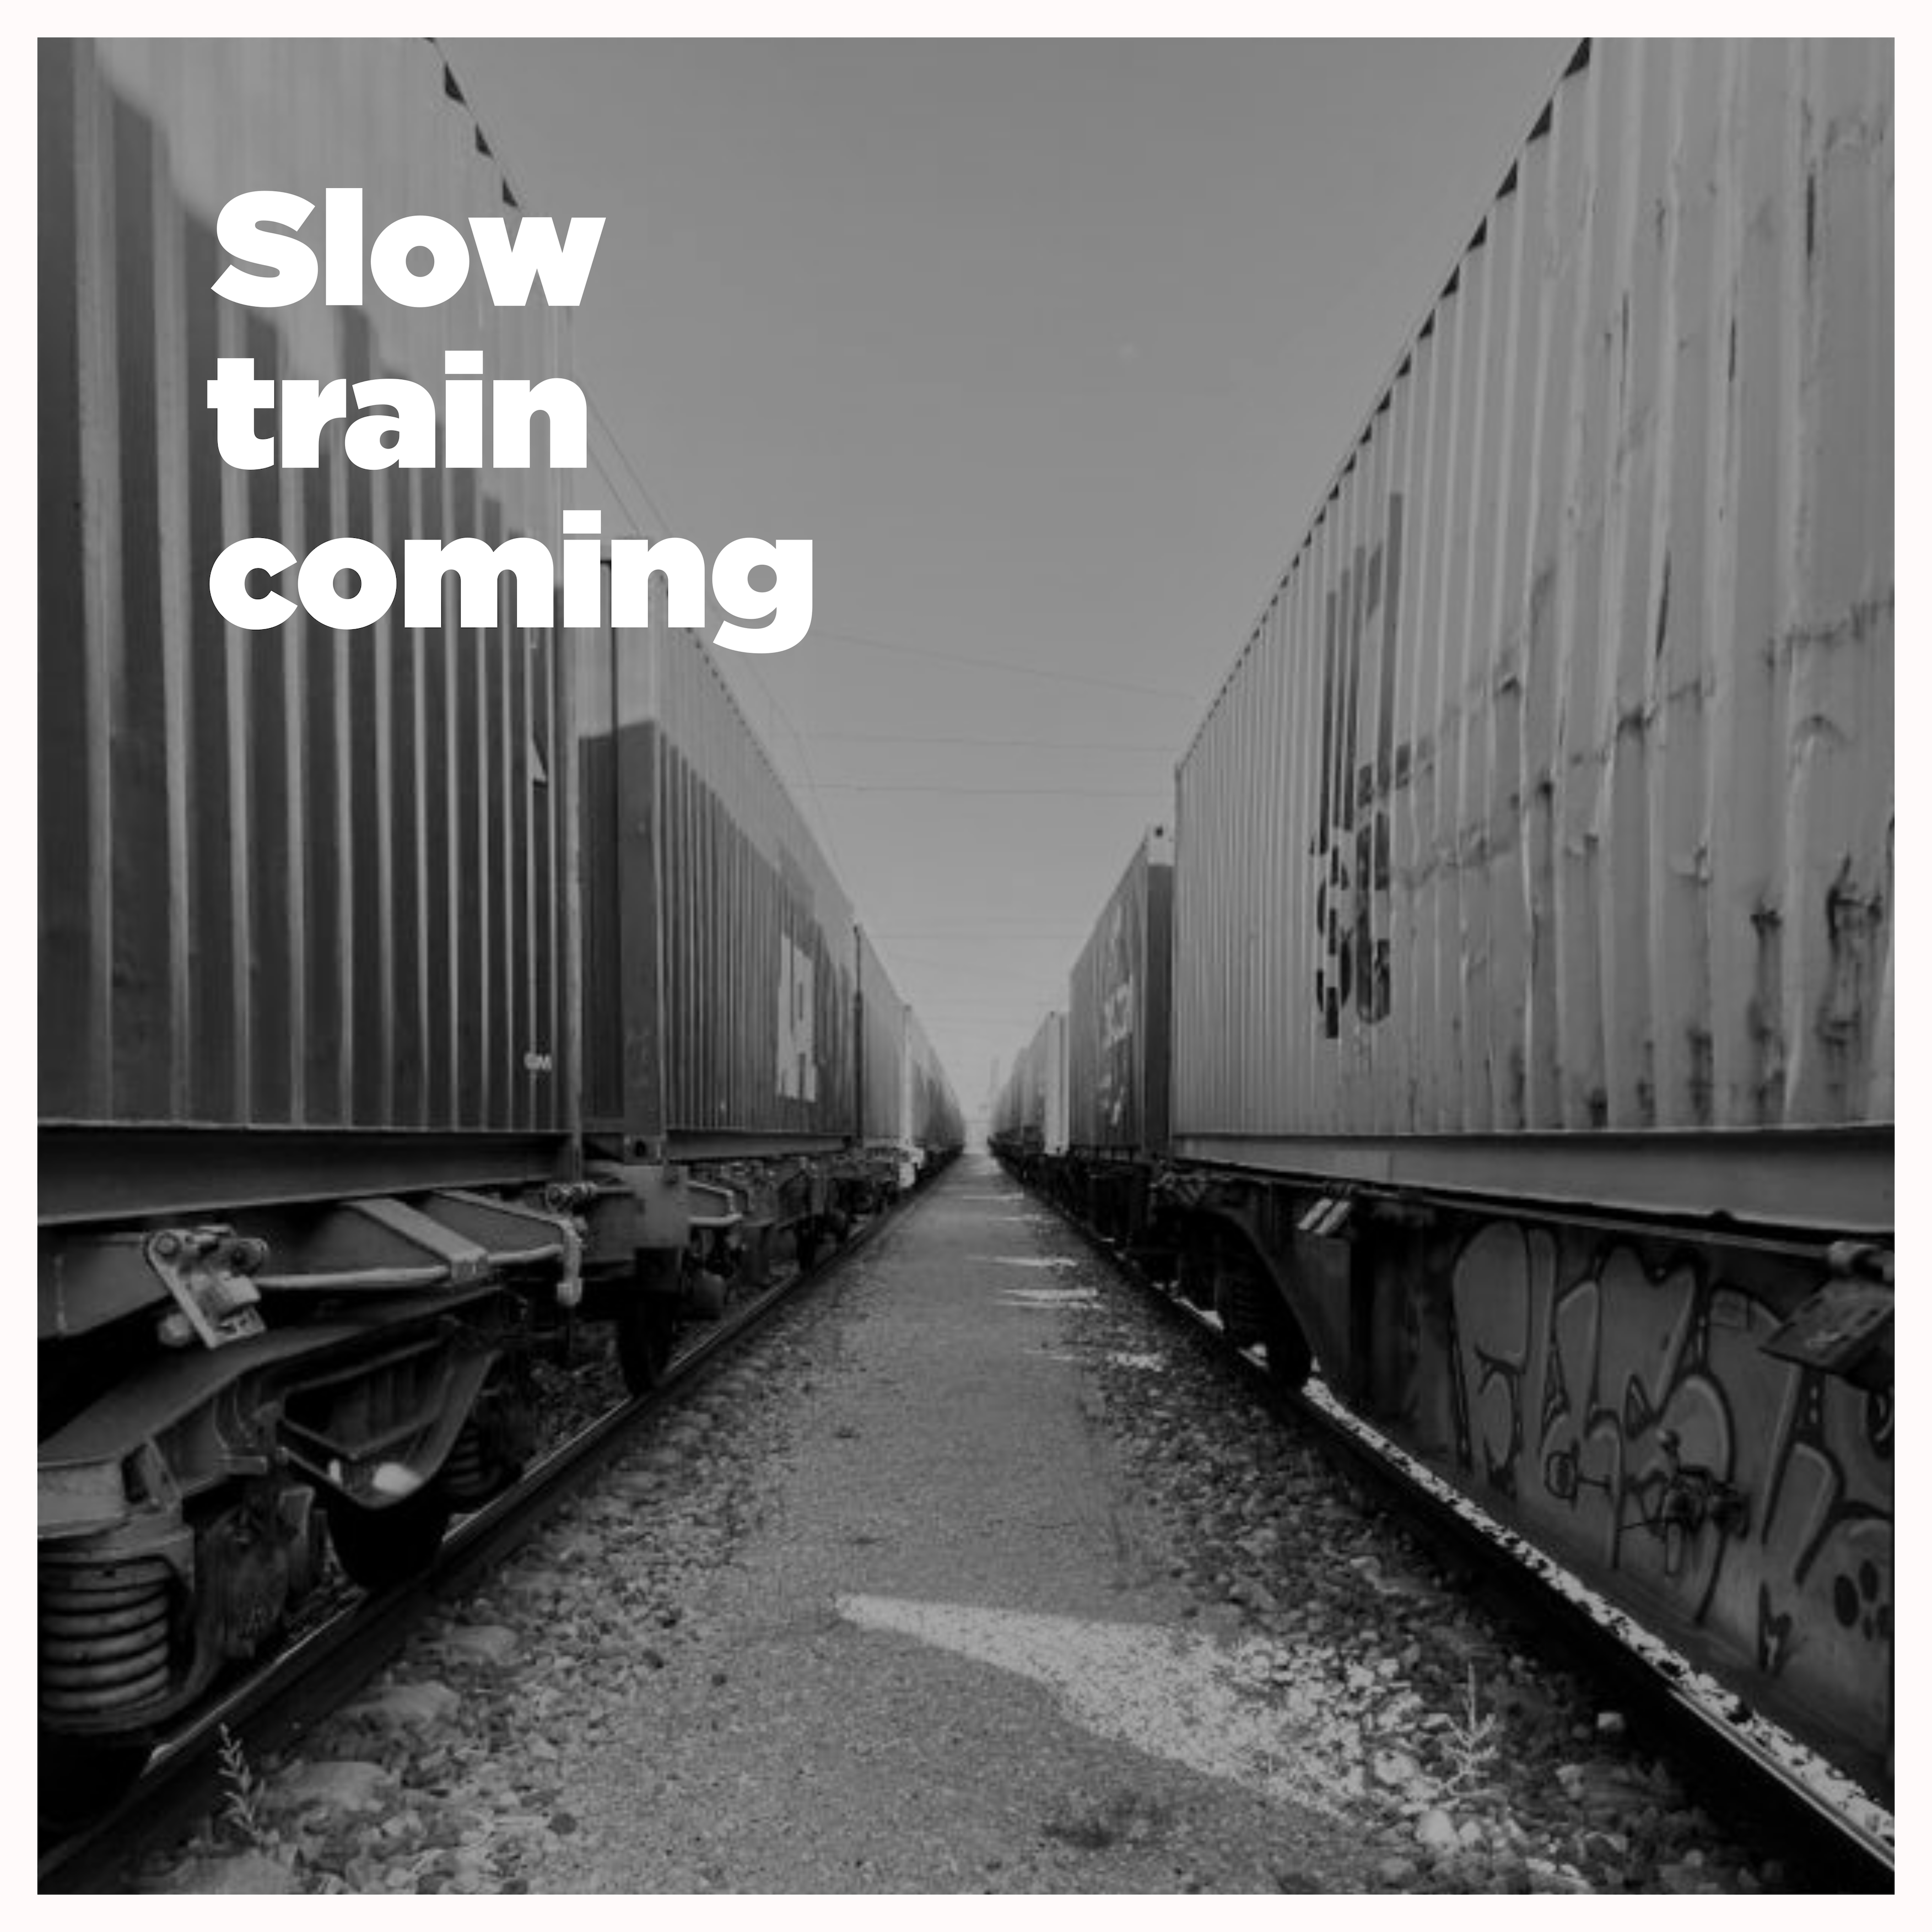 Slow train coming